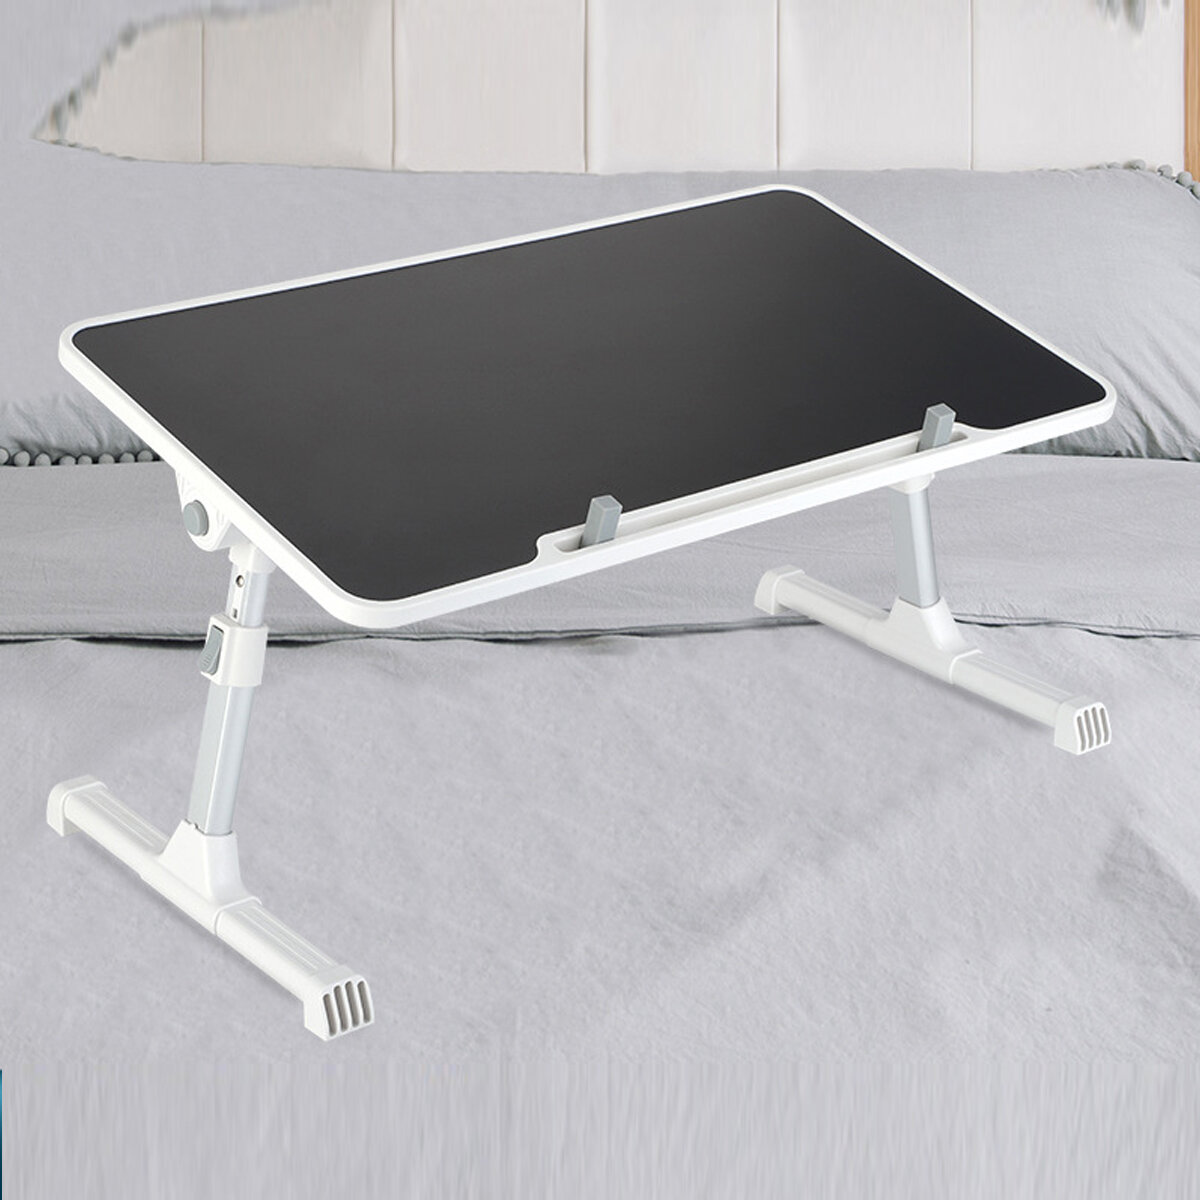 Foldable Height Angle Adjustable USB Cooling Fan Bed Laptop Desk, Adjustable Height, Easy to Fold